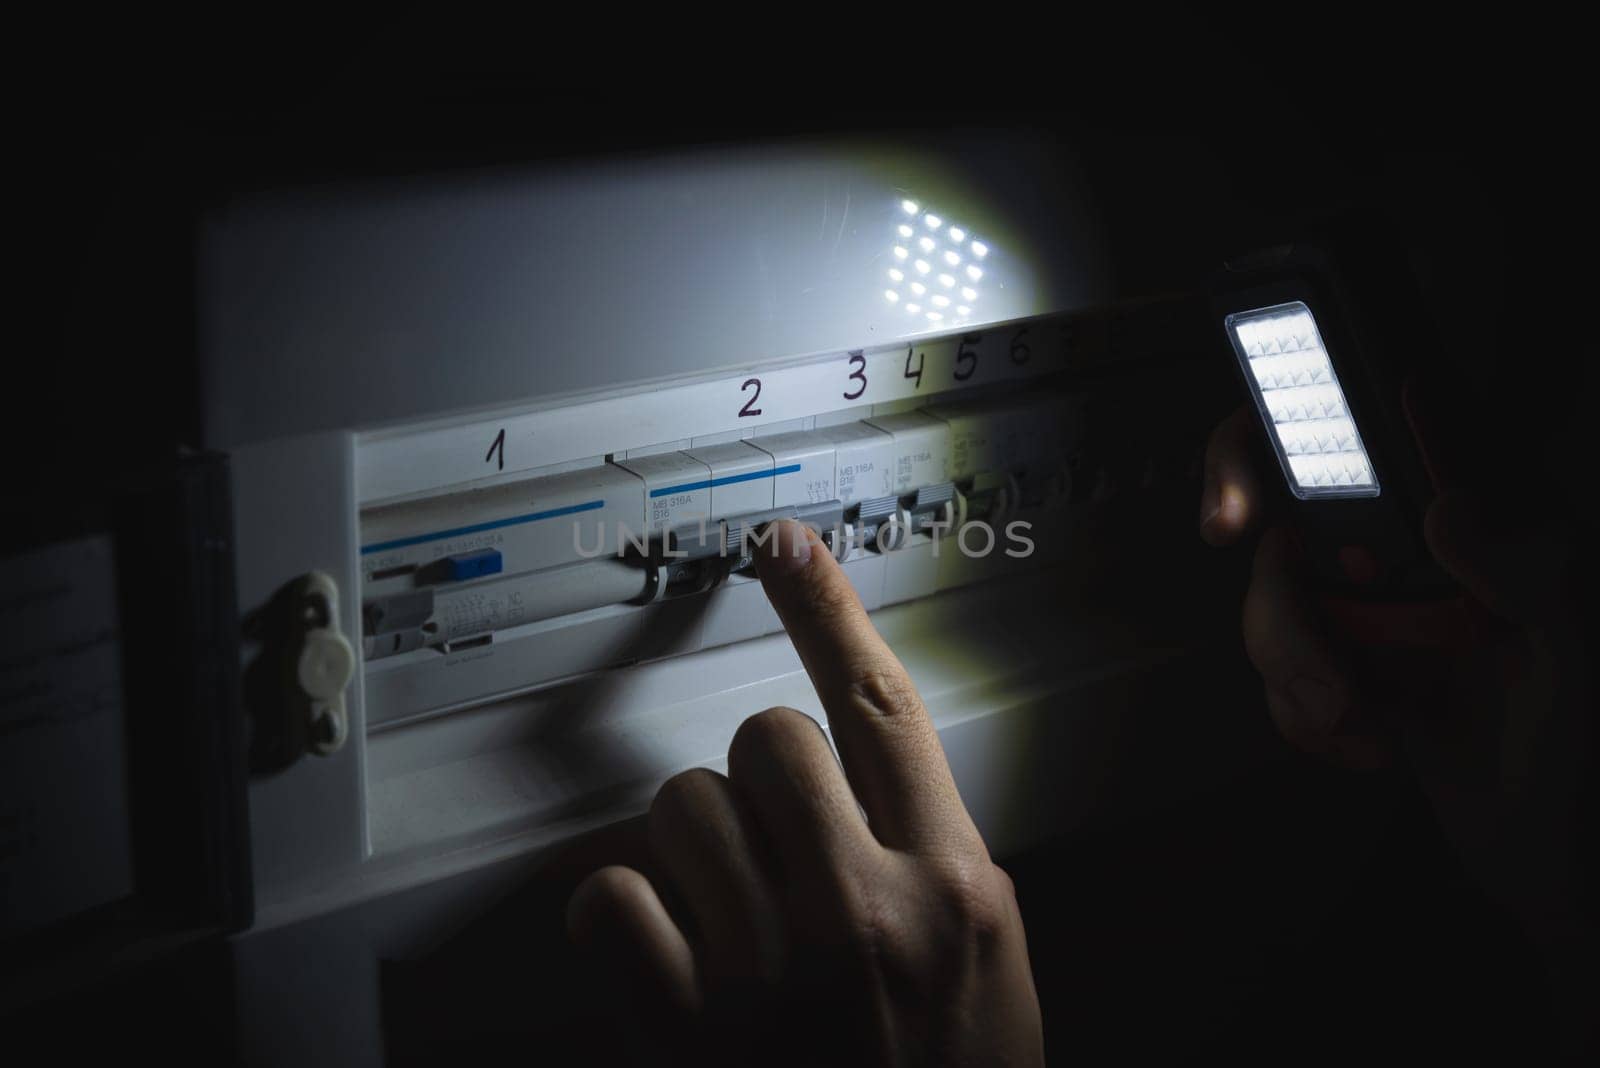 Investigate a home fuse box during a power outage by simpson33